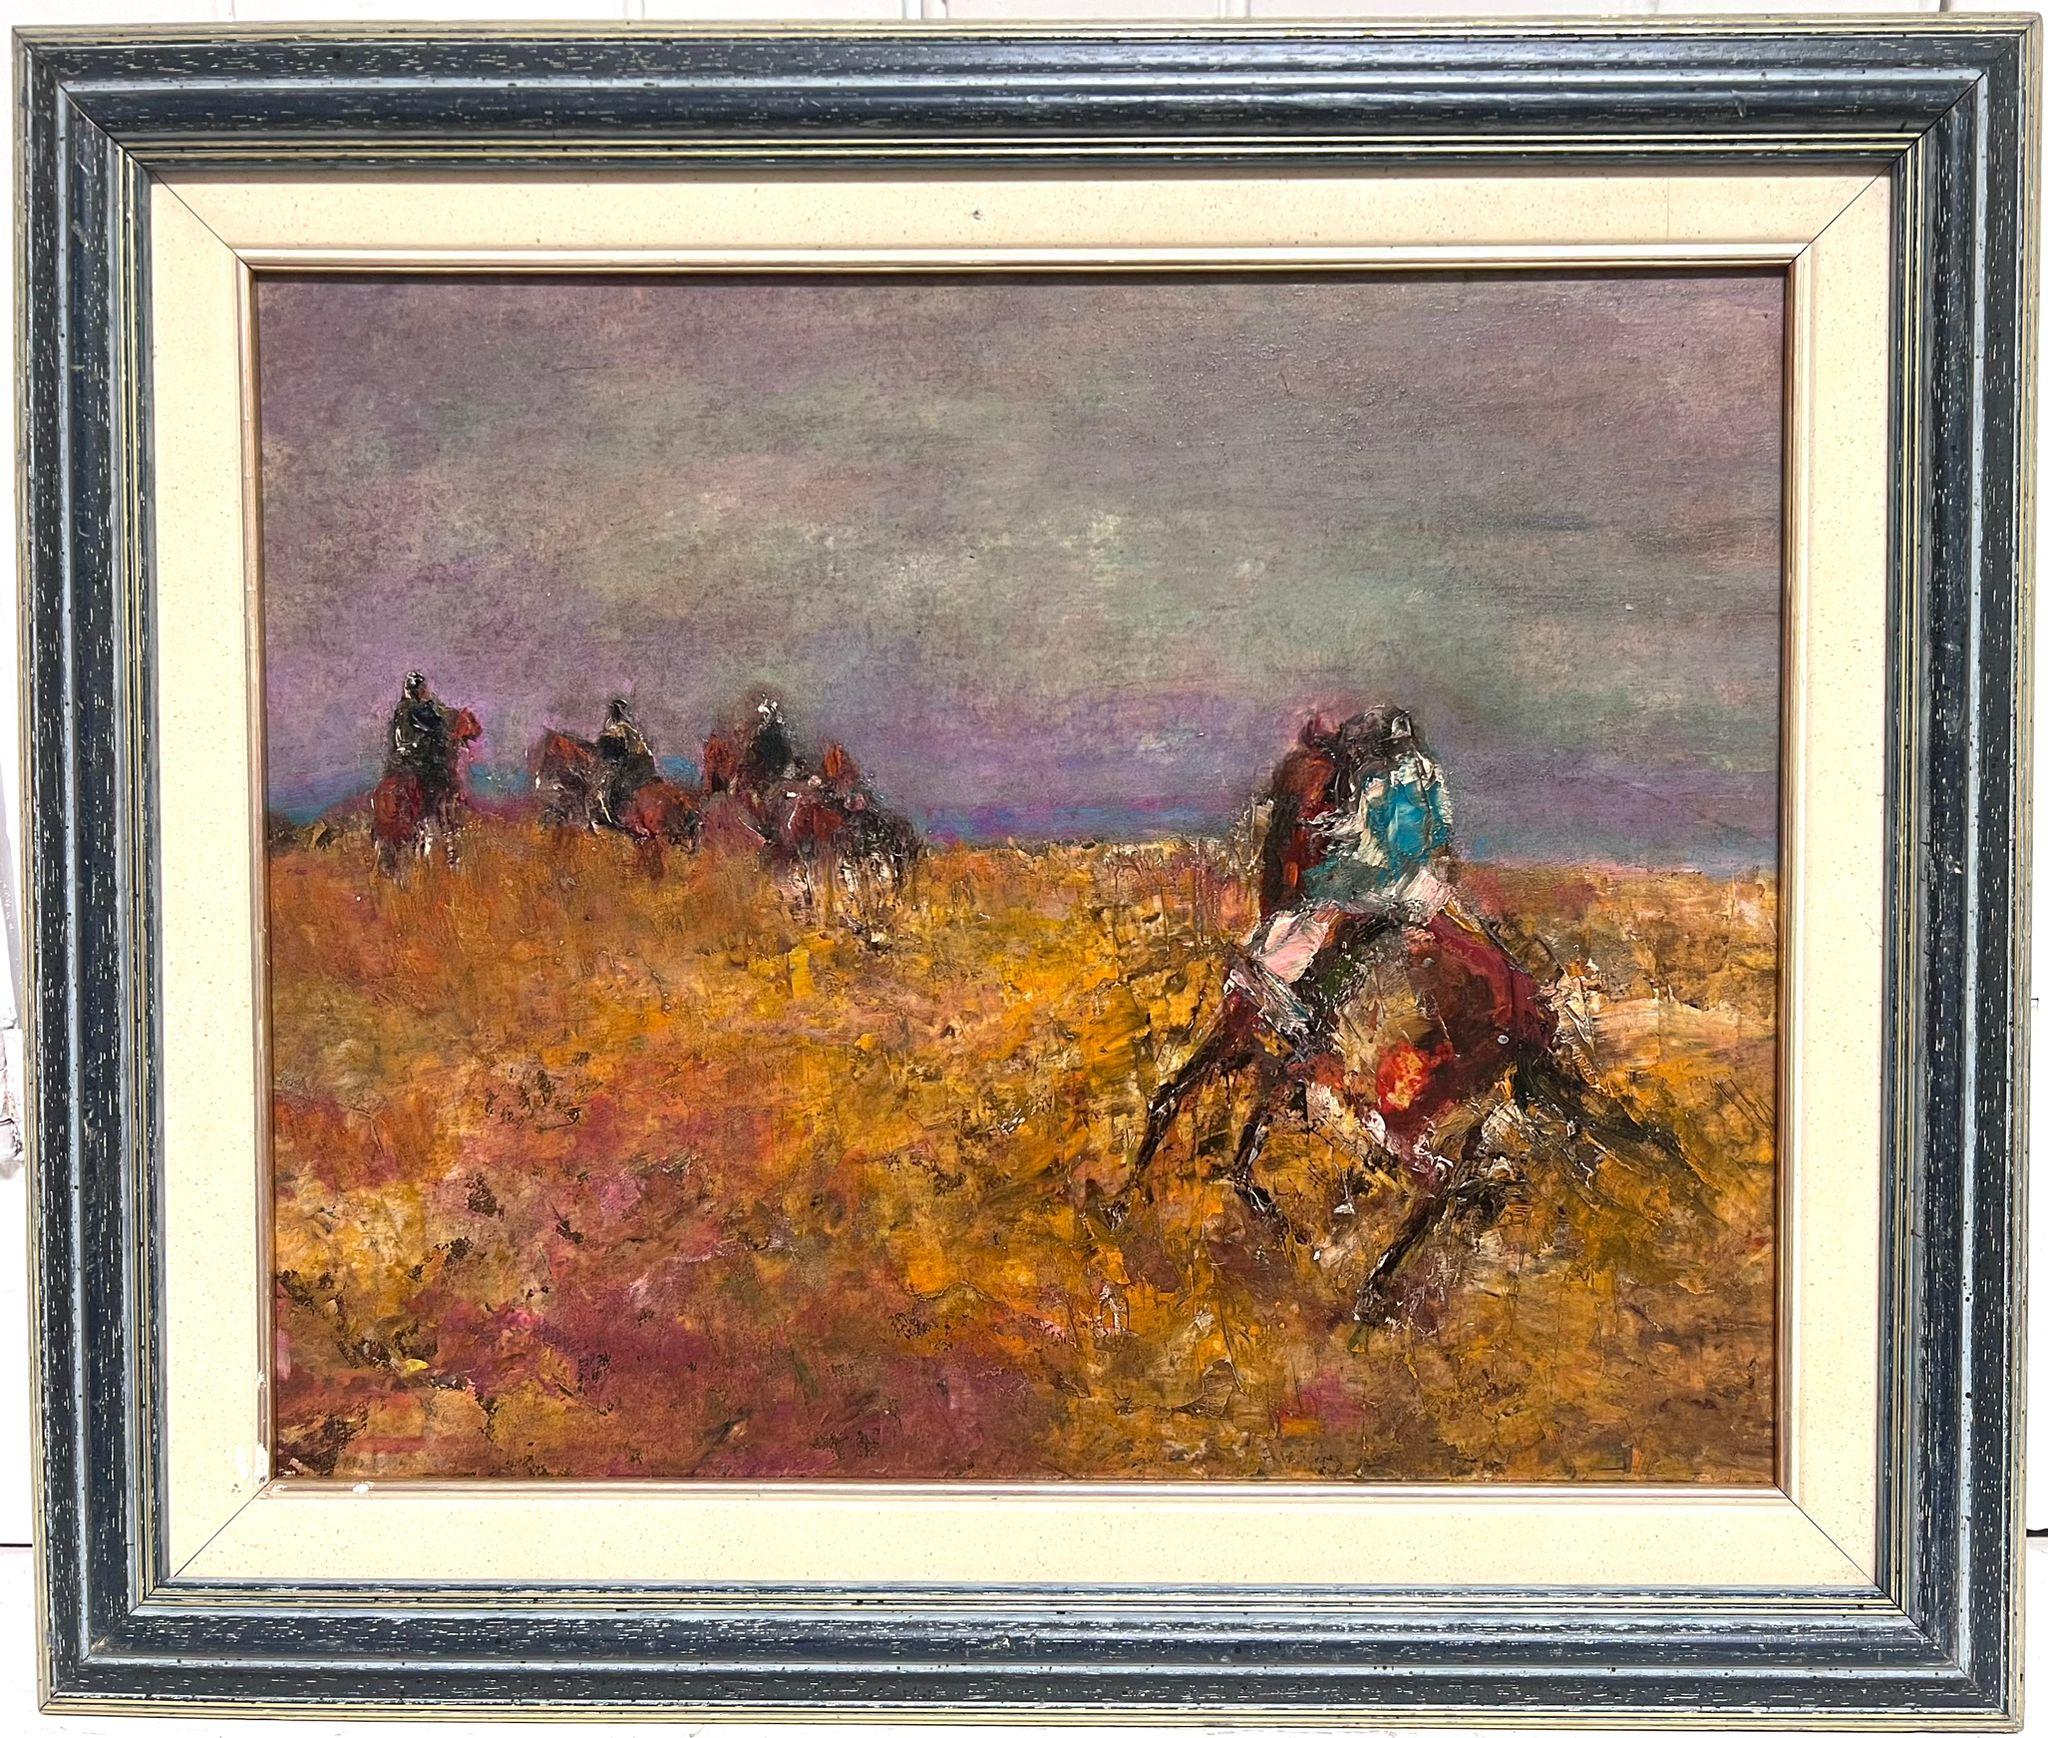 Chantilly
French Expressionist artist, 20th century
oil on board, framed 
framed: 17.5 x 21 inches
board: 13 x 16 inches
inscribed verso
provenance: private collection, France
condition: very good and sound condition